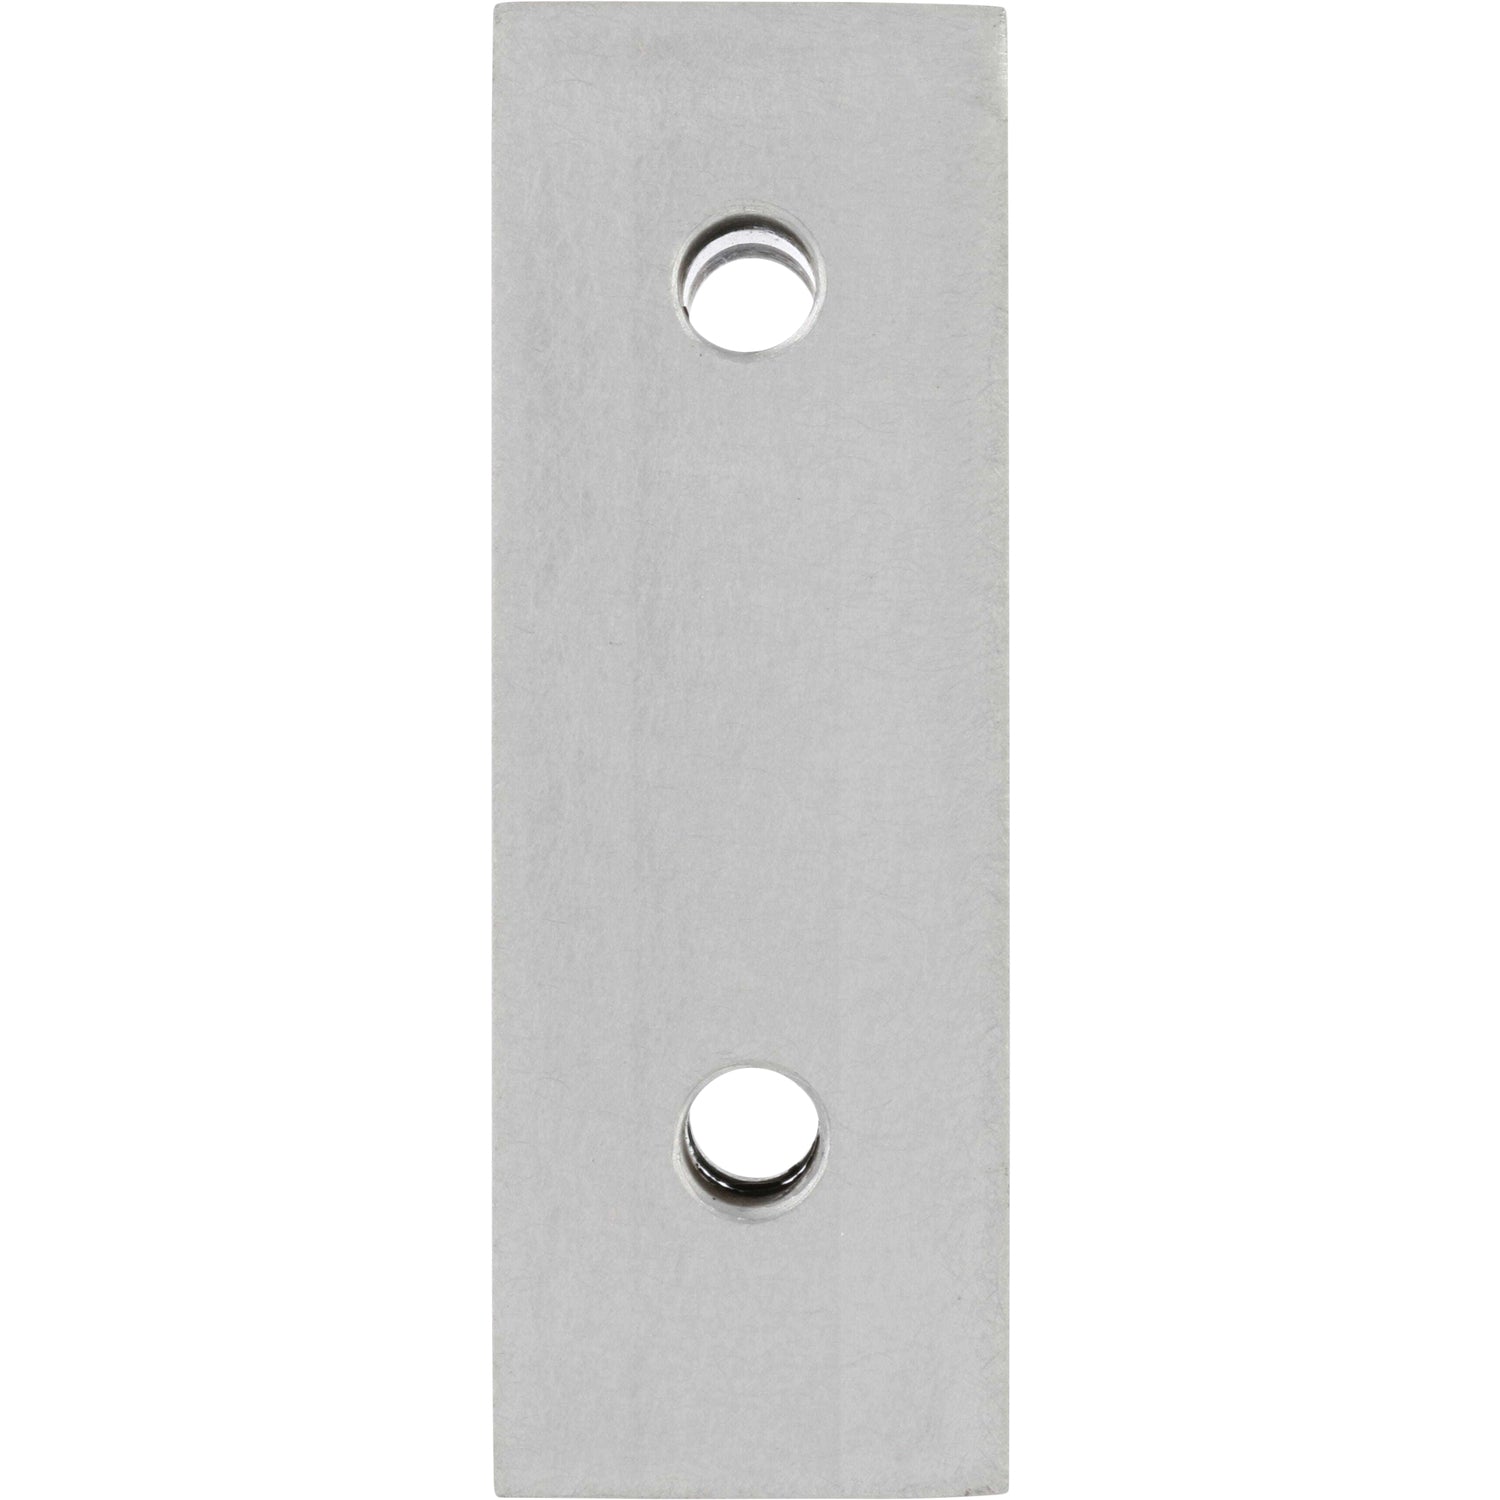 Rectangular hard anodized aluminum block with two threaded holes is on the part&